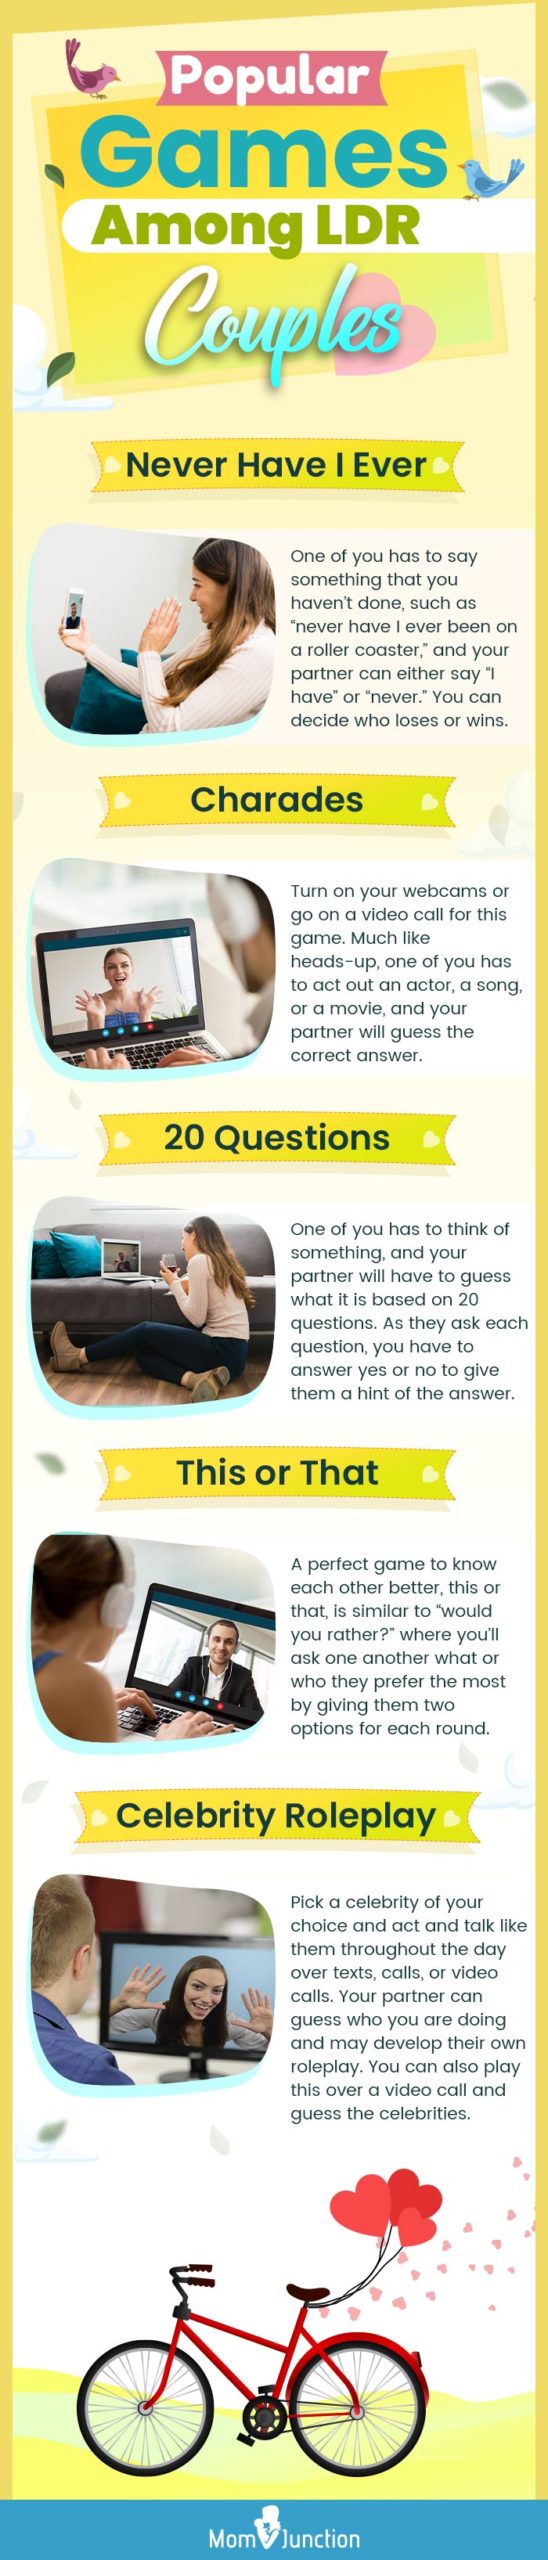 games for long distance relationships (infographic)